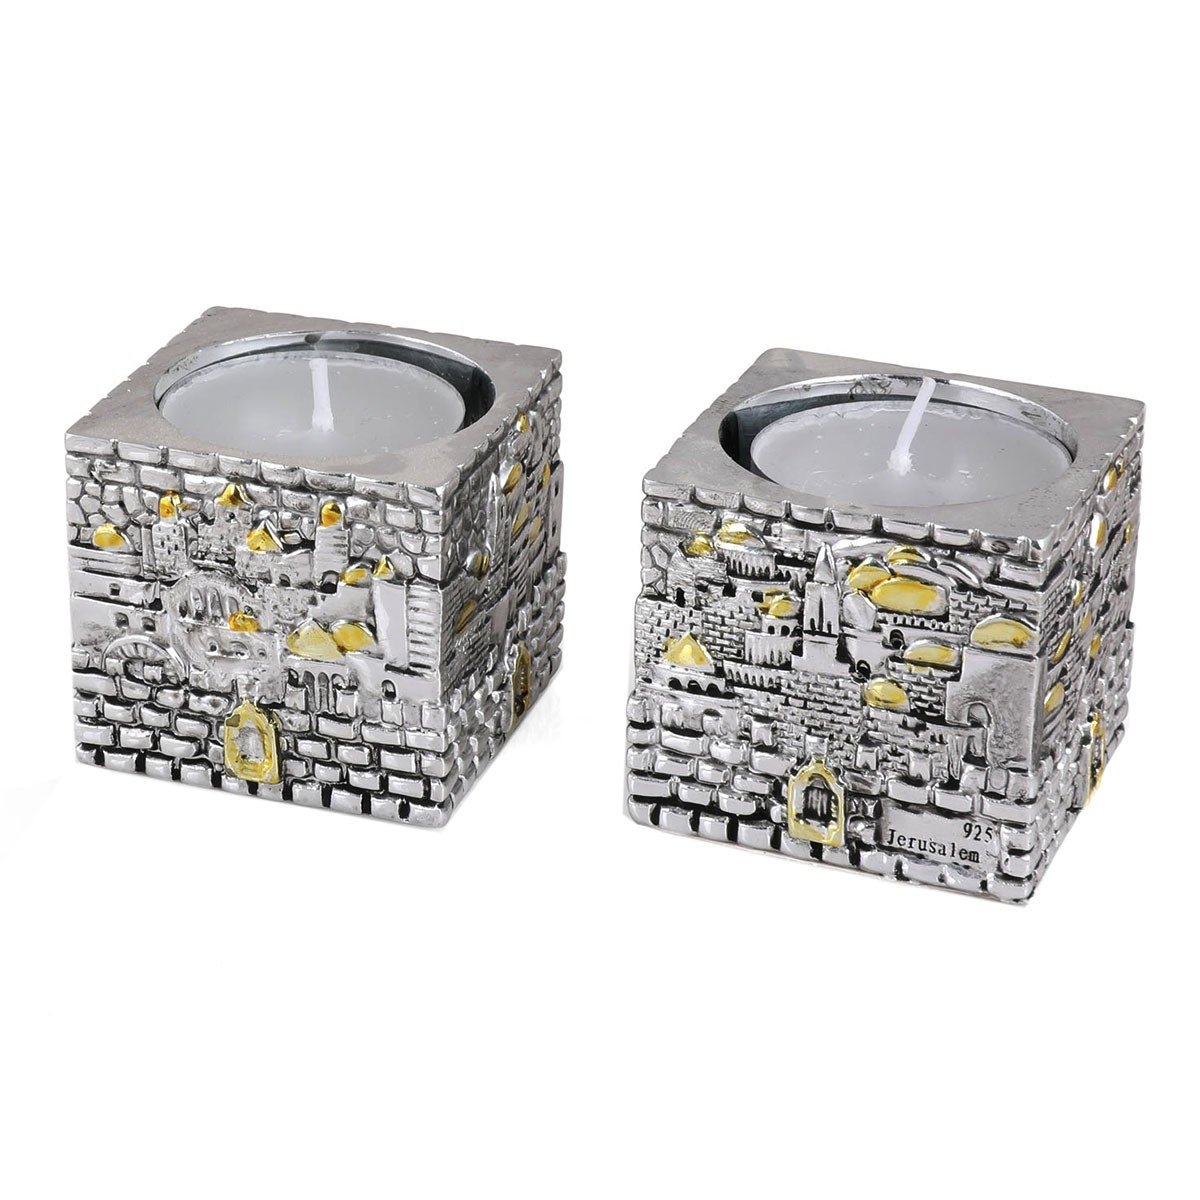 Silver-Plated Cube Candlesticks With Jerusalem Design - 1